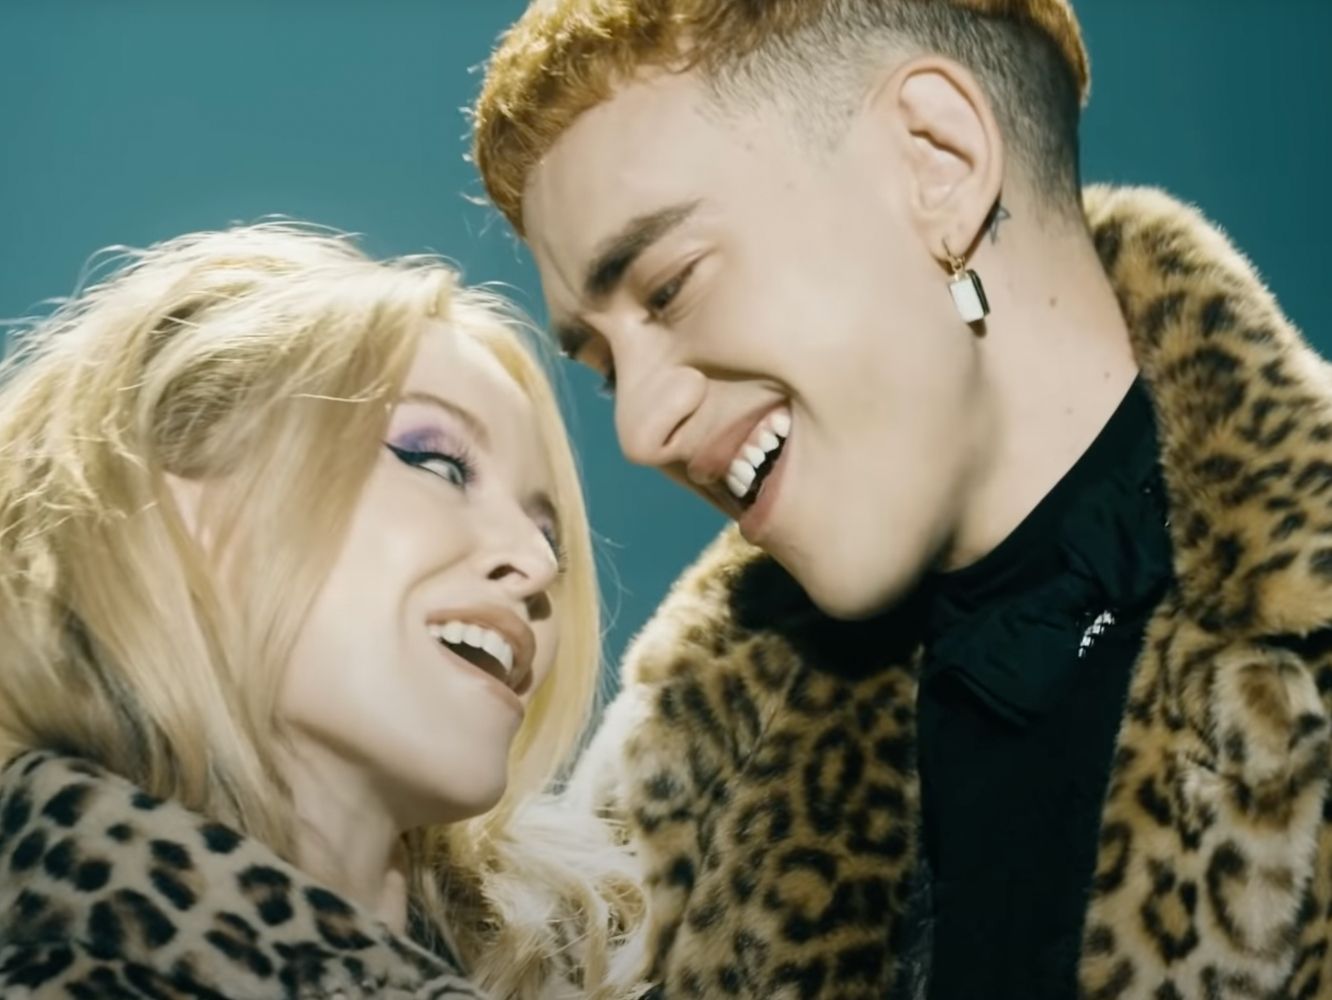  Kylie y Years And Years se montan su ‘Beautiful Liar’ en ‘A Second To Midnight’